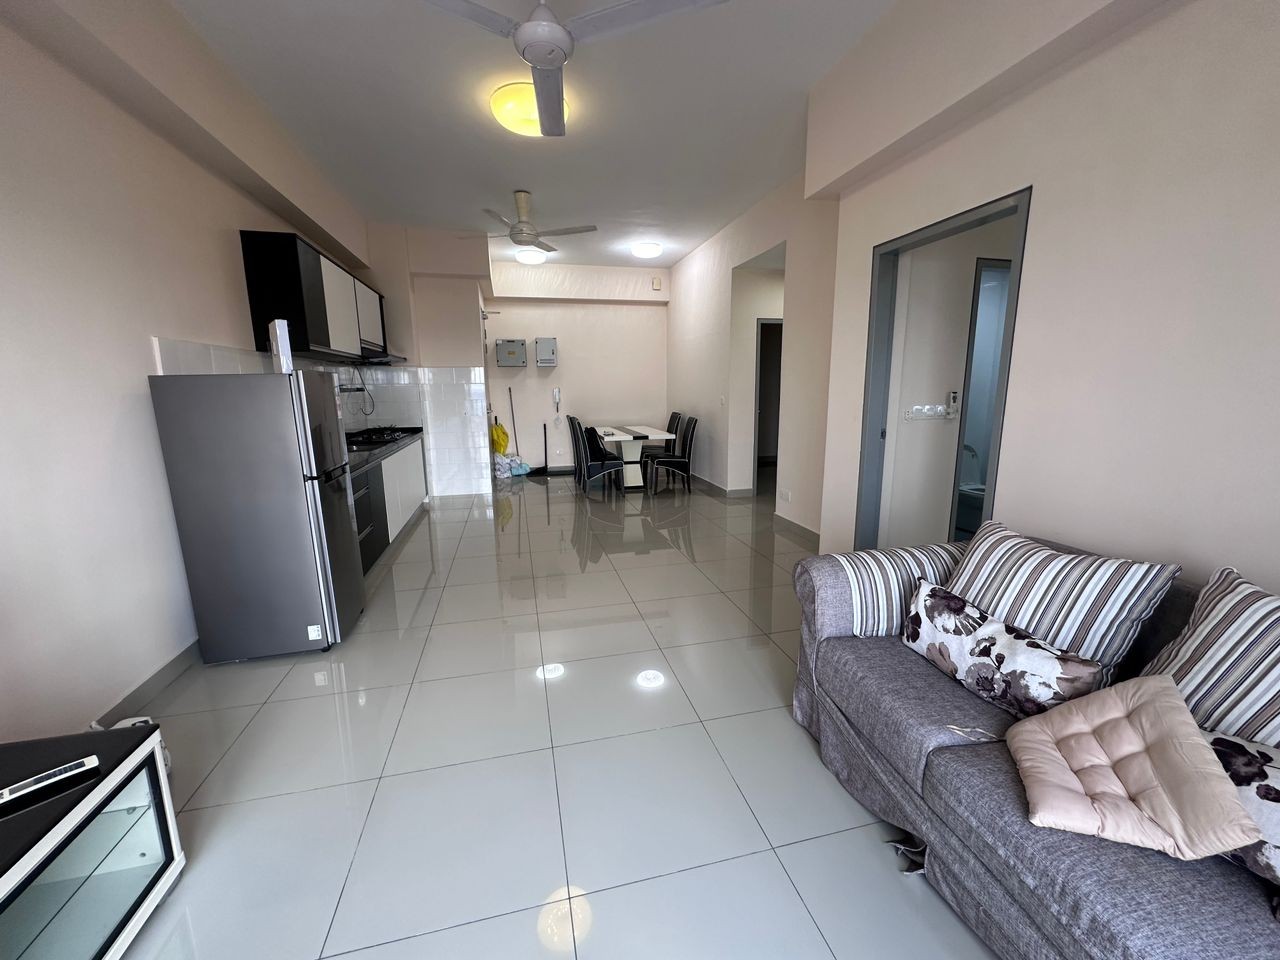 The Wharf Residence, 2 Rooms 2 Baths Fully Furnished Apartment for Rent.